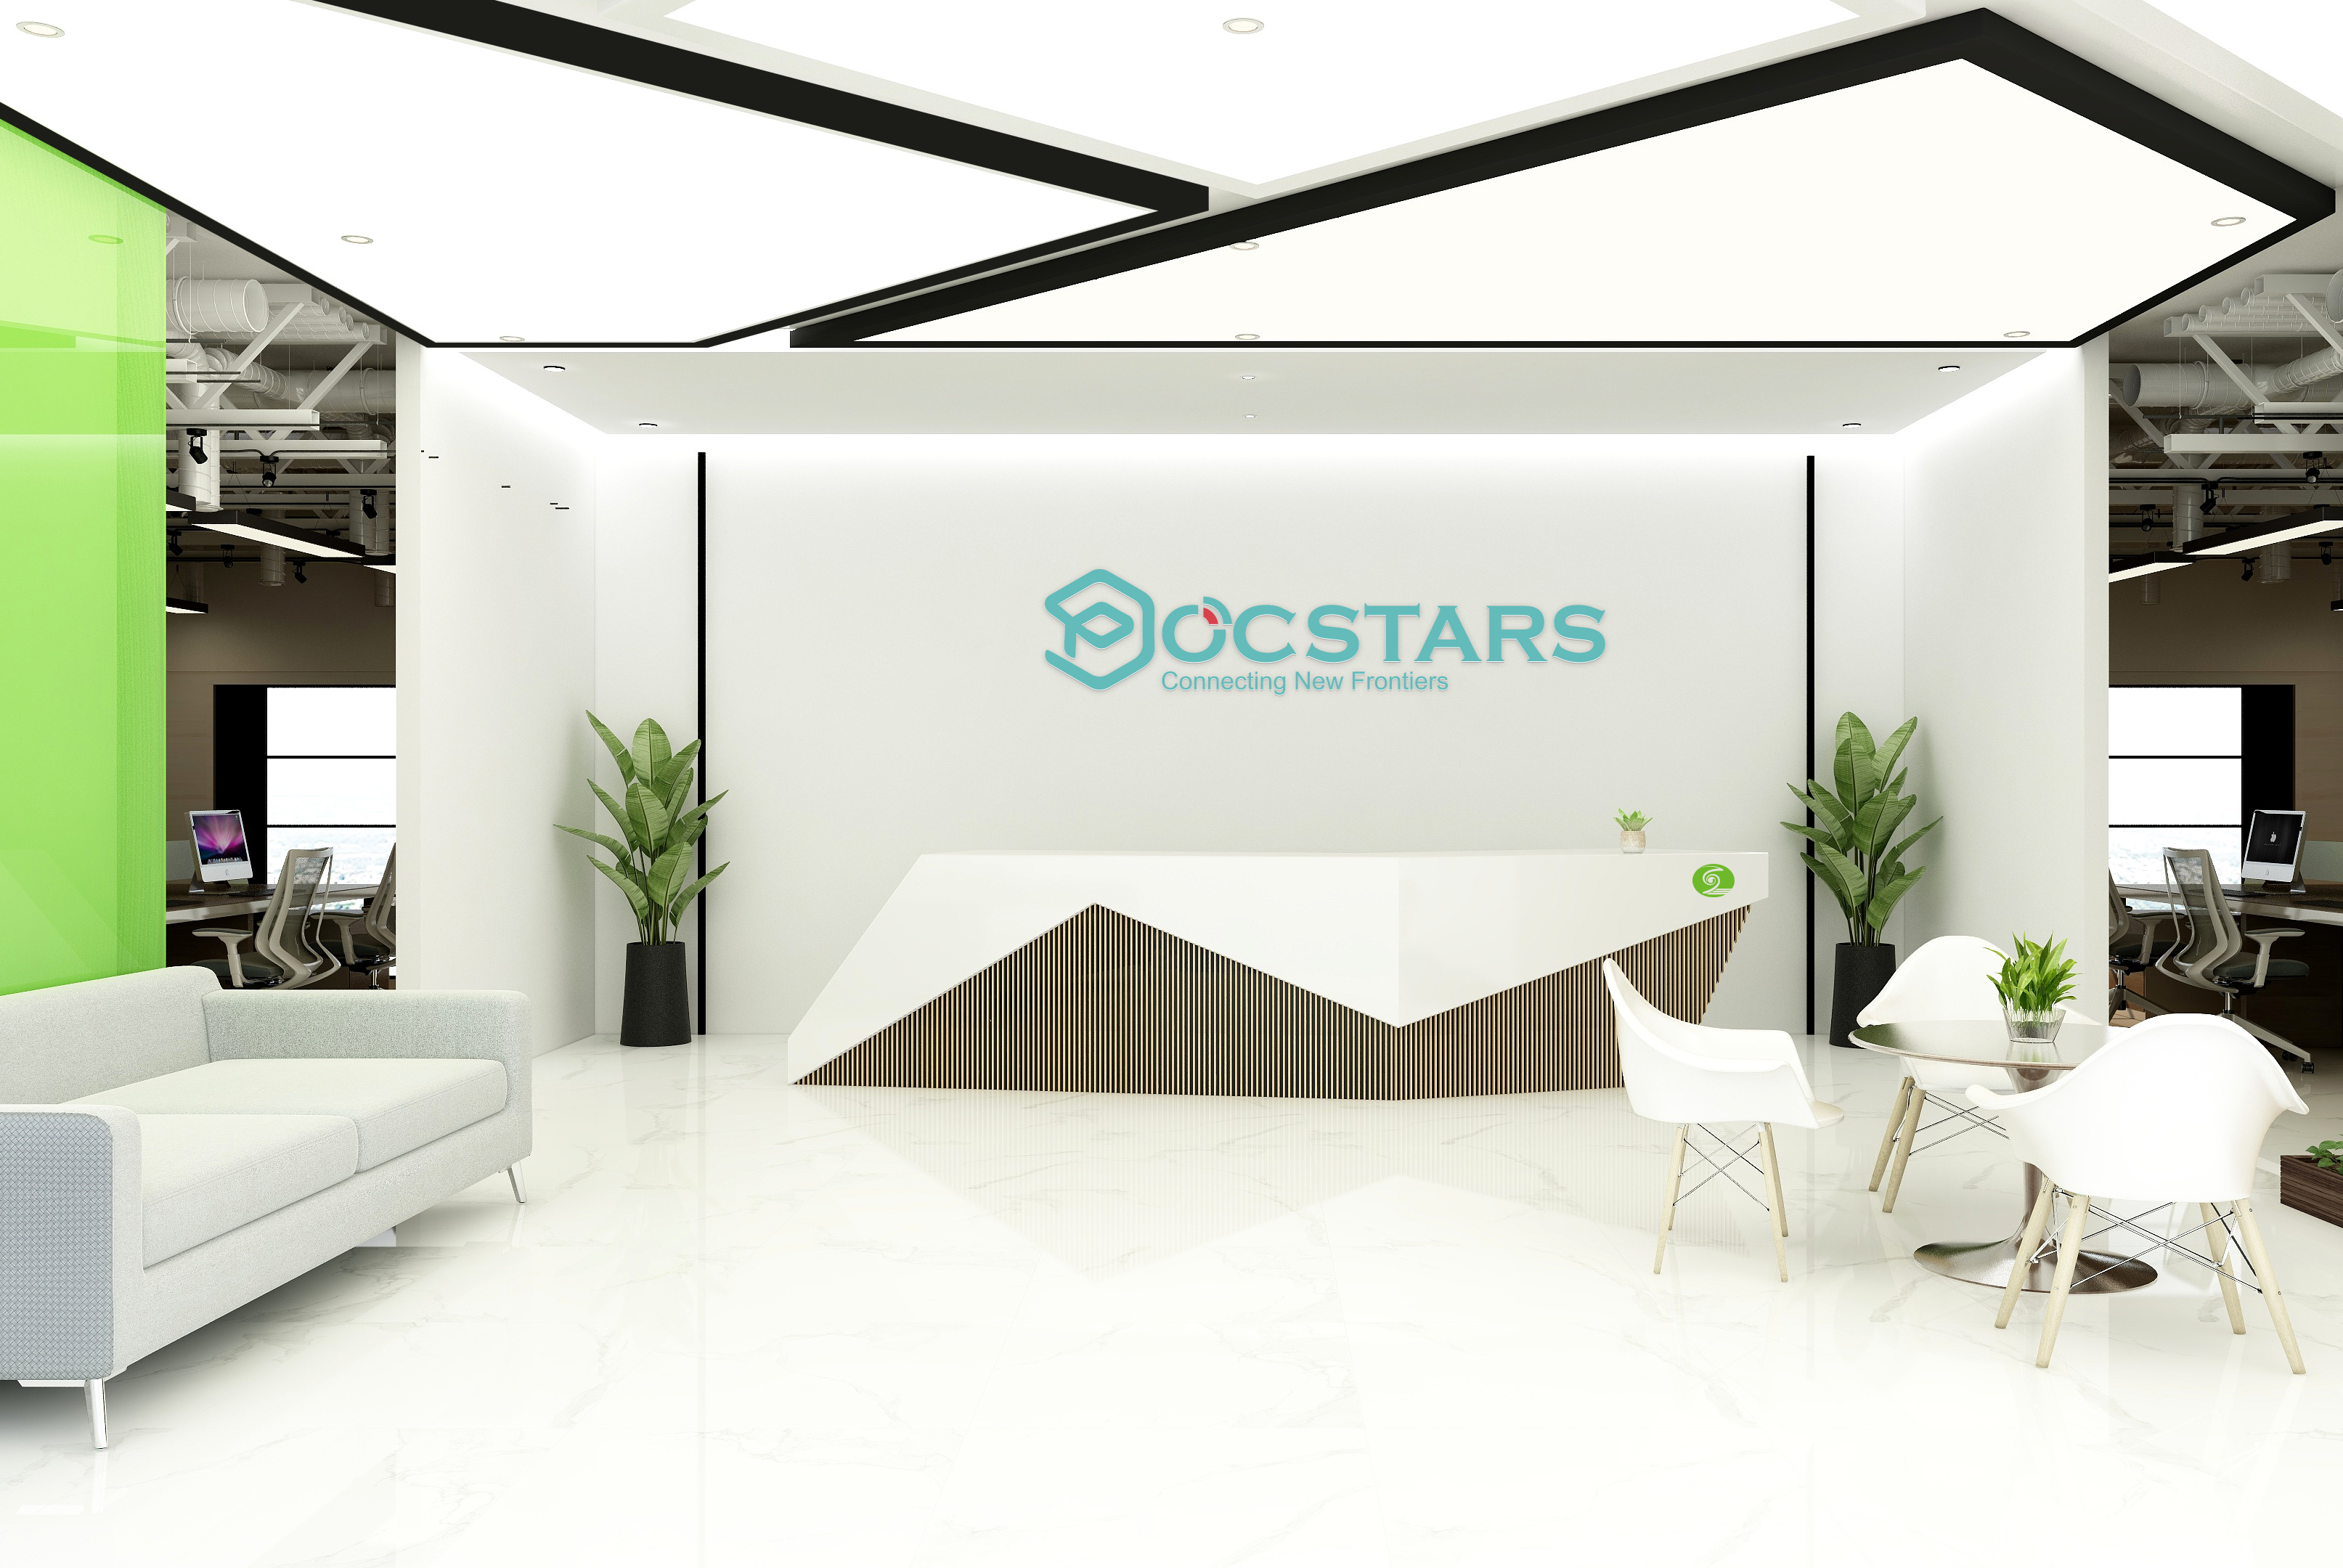 POCSTARS Relocates to Its New Office